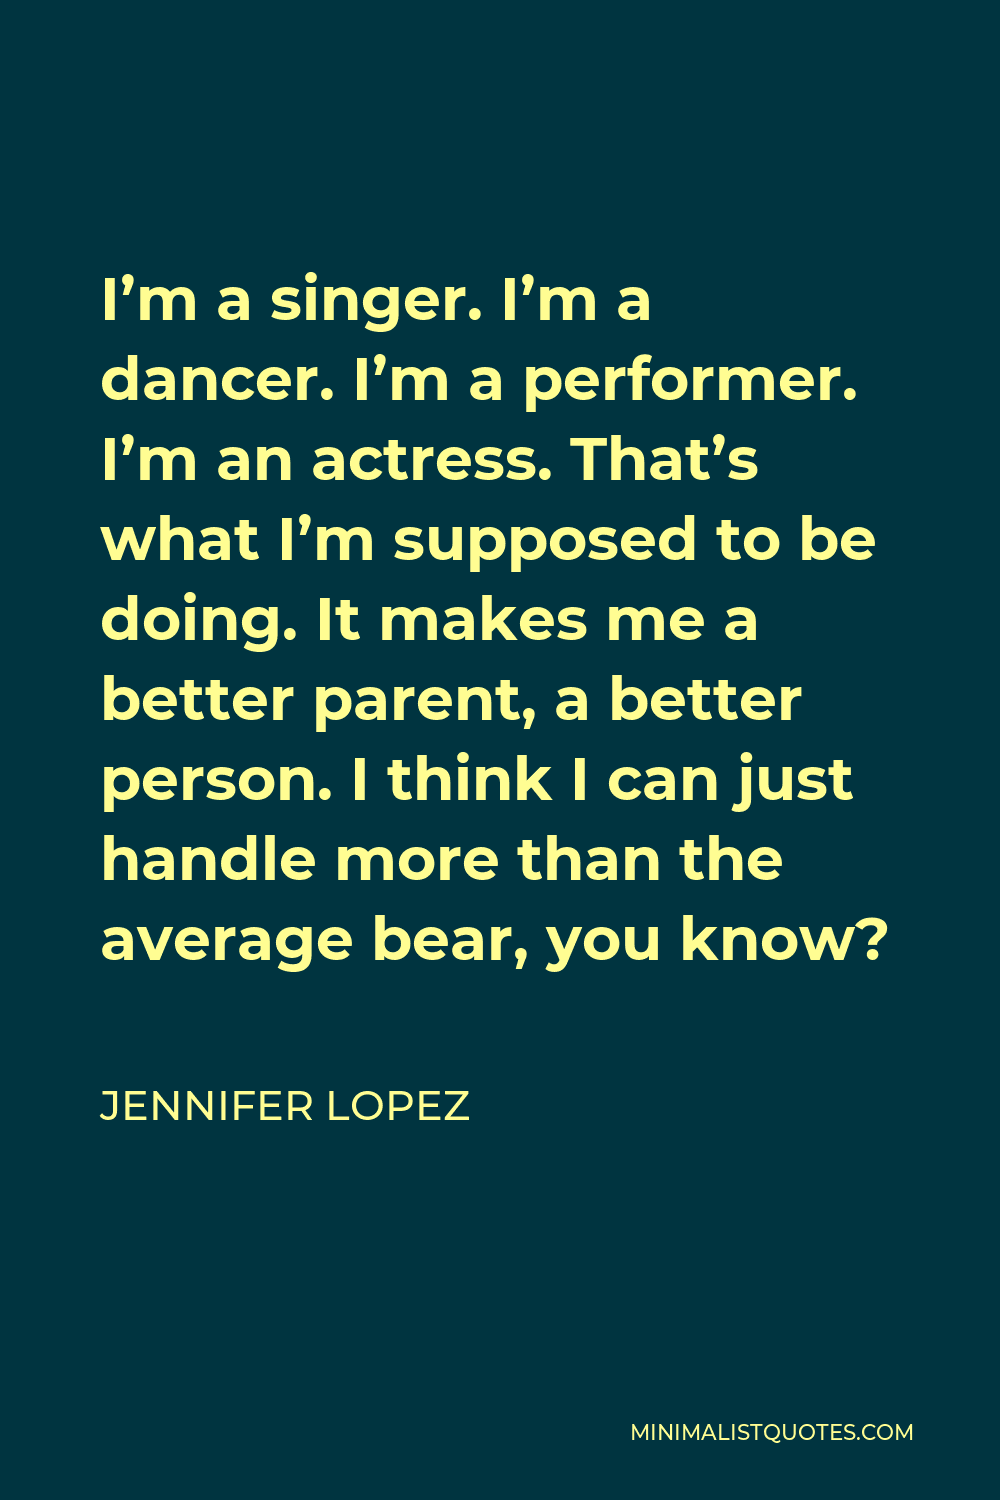 Jennifer Lopez Quote - I’m a singer. I’m a dancer. I’m a performer. I’m an actress. That’s what I’m supposed to be doing. It makes me a better parent, a better person. I think I can just handle more than the average bear, you know?